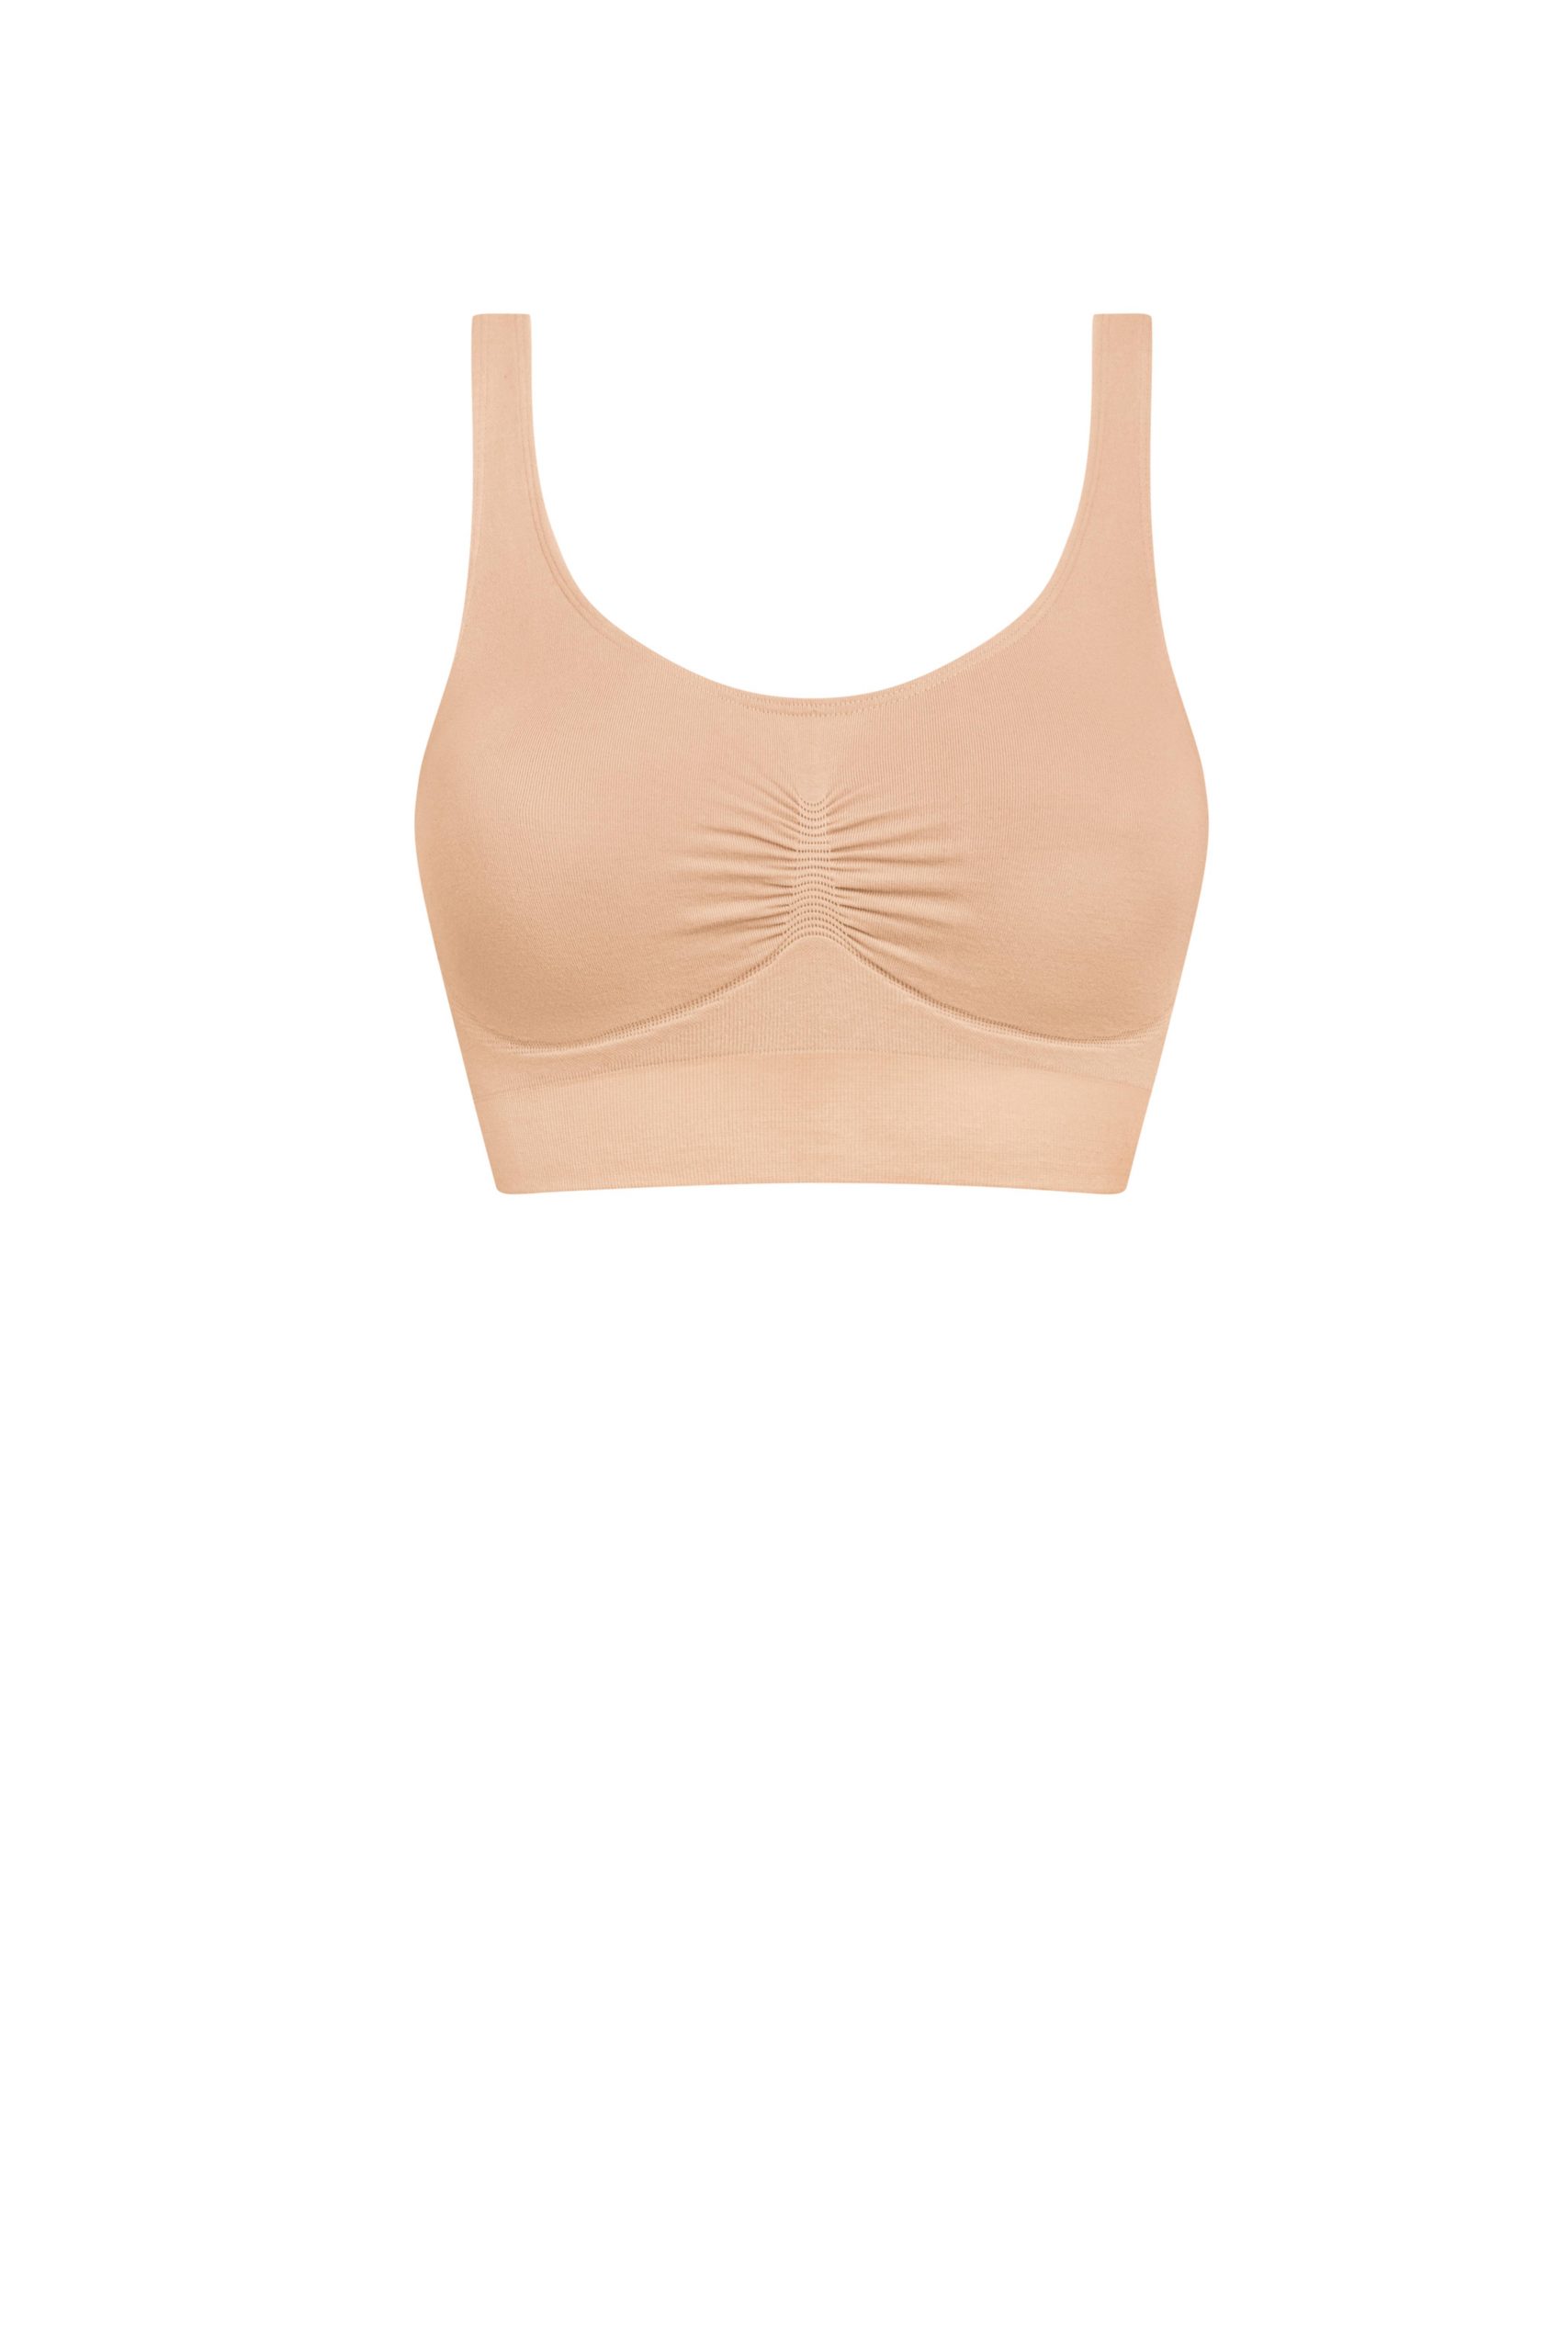 The Best Post-Mastectomy Bras From Under-the-Radar Brands You